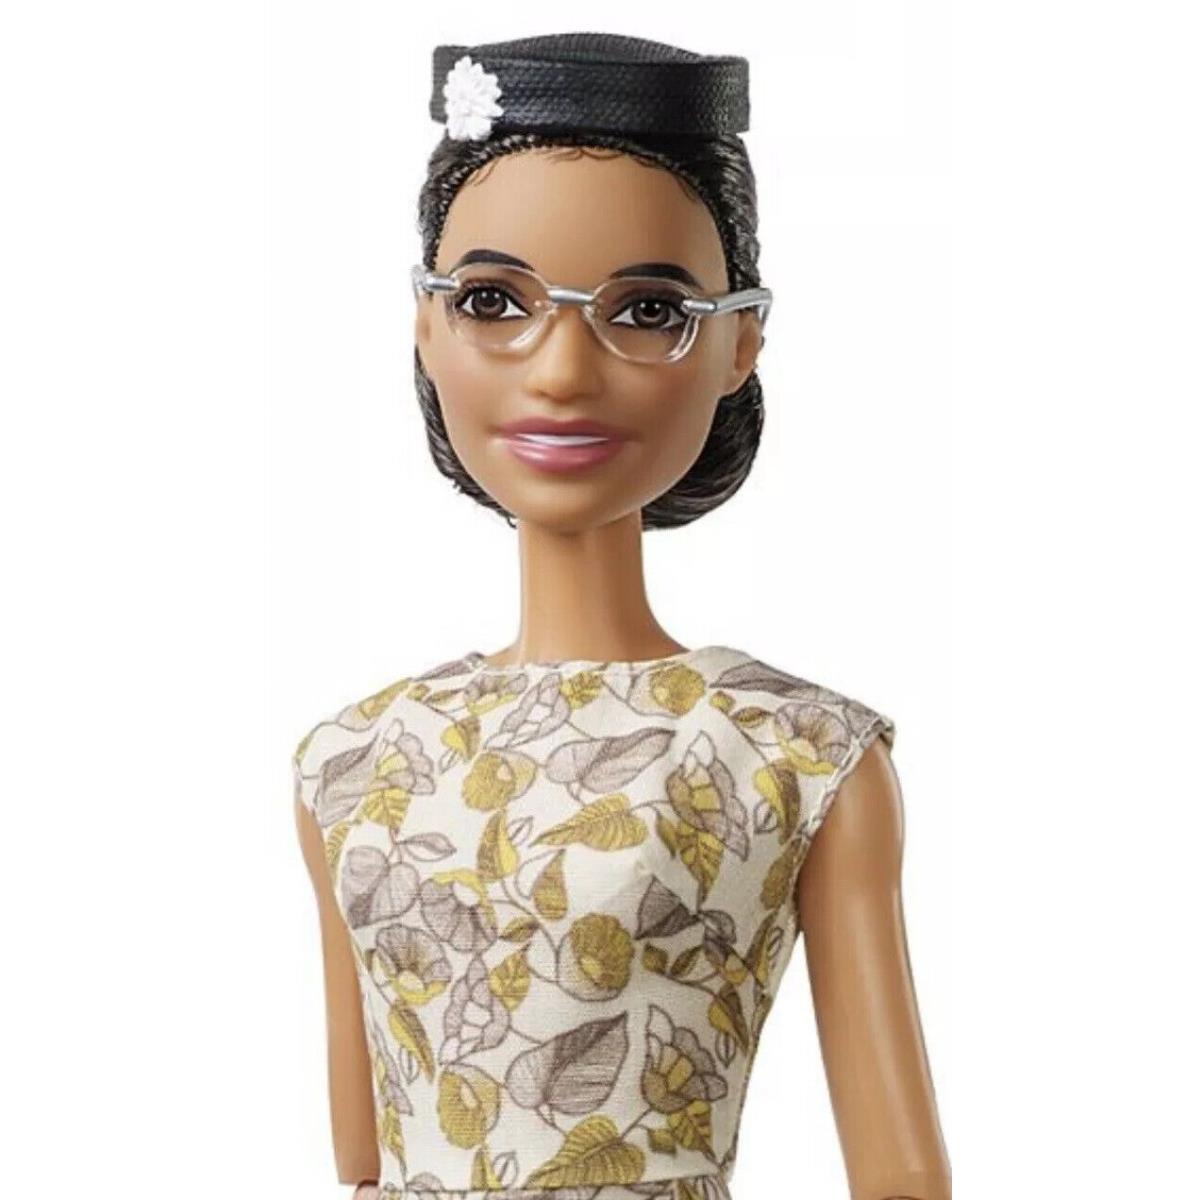 Rosa Parks Barbie Doll Inspiring Women Collection 2019